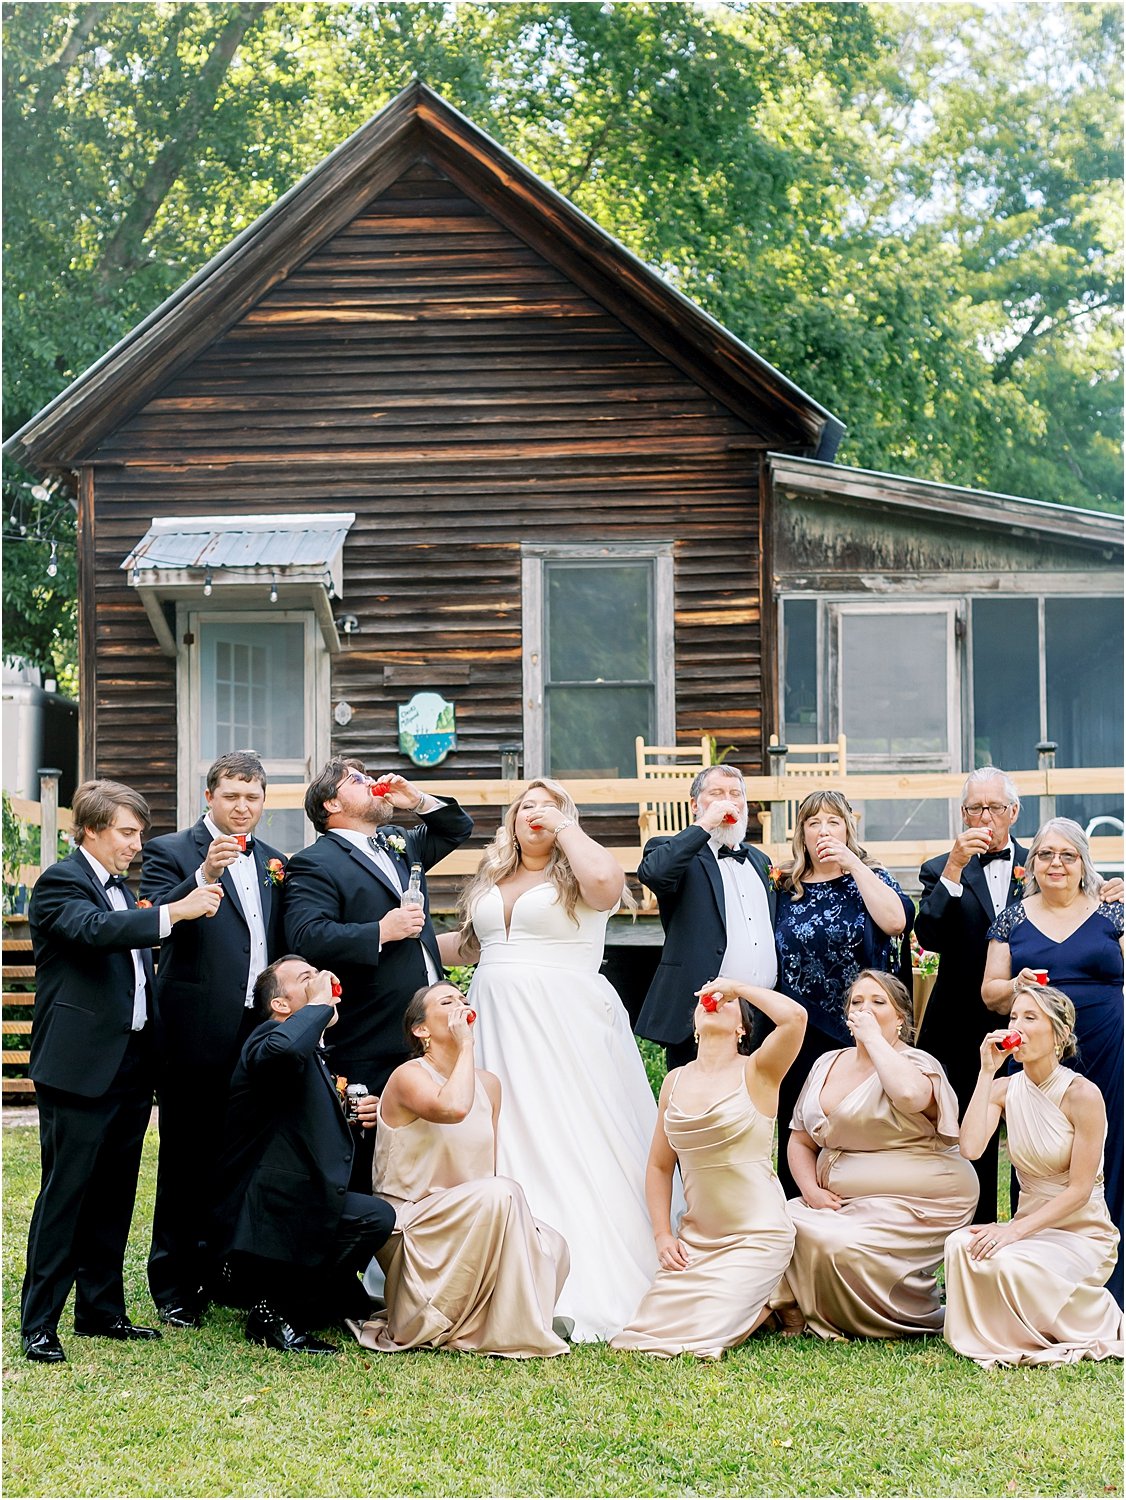 Take a shot with your Bridal Party